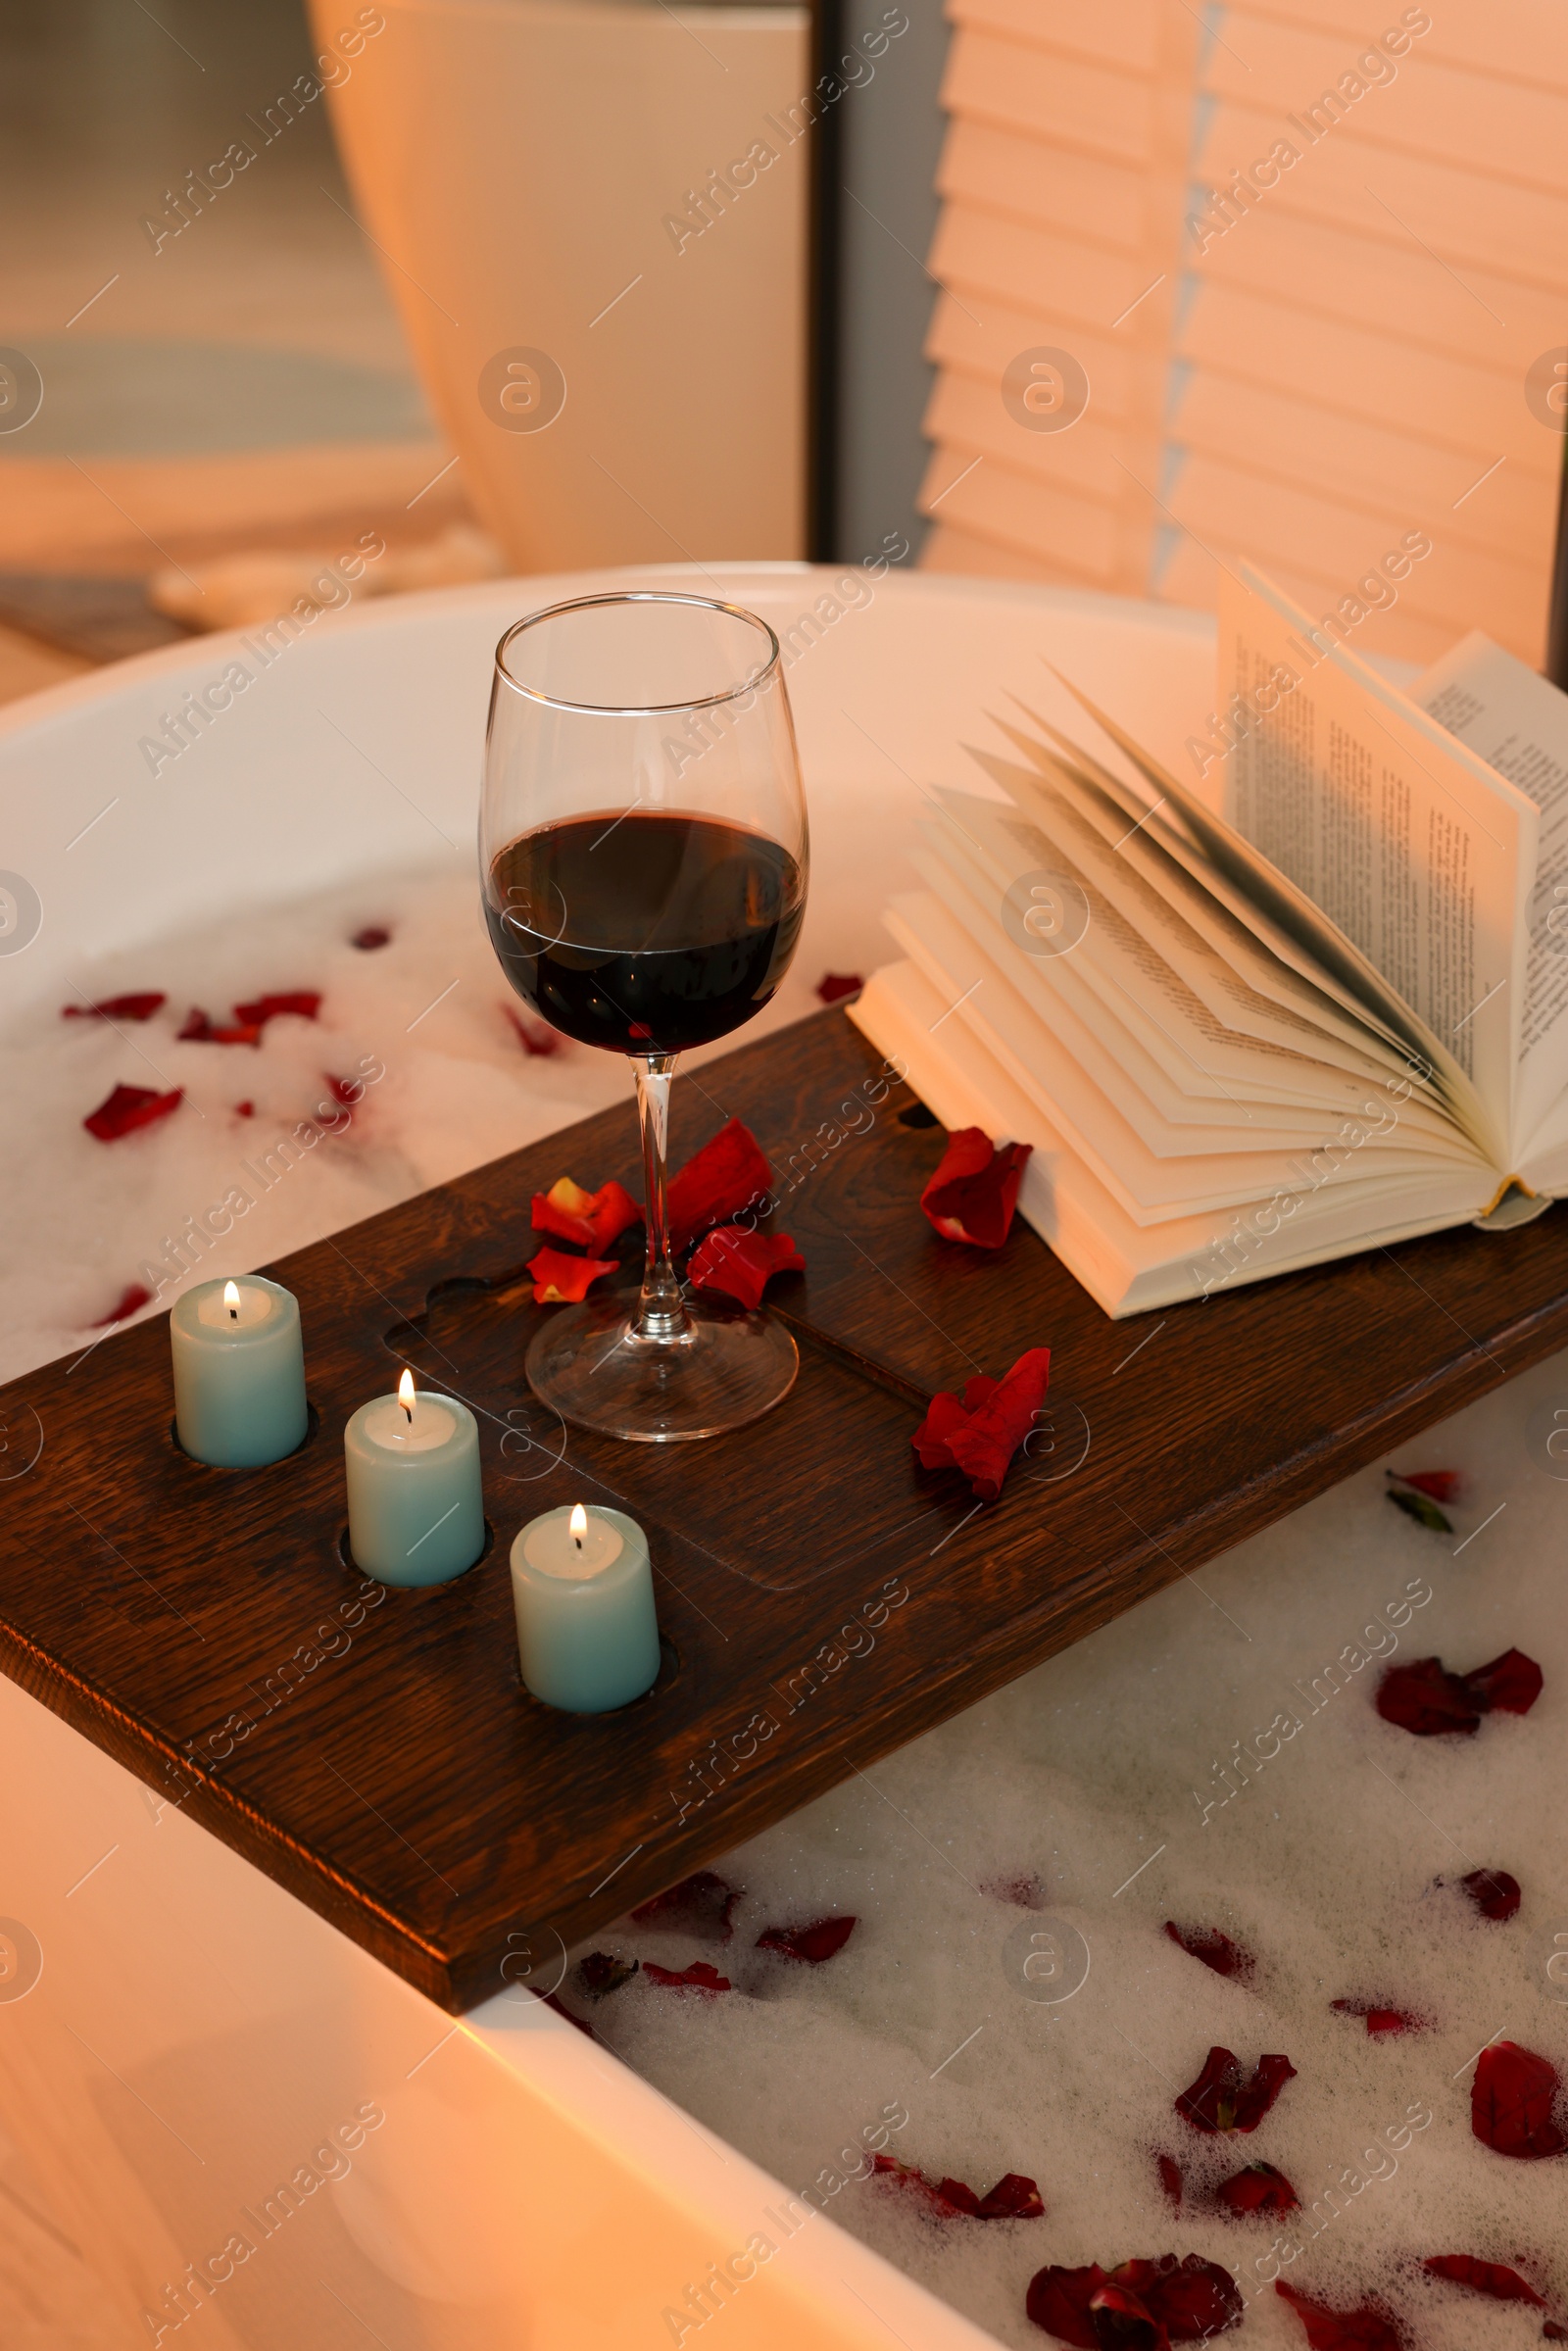 Photo of Wooden board with glass of wine, book, burning candles and rose petals on bath tub